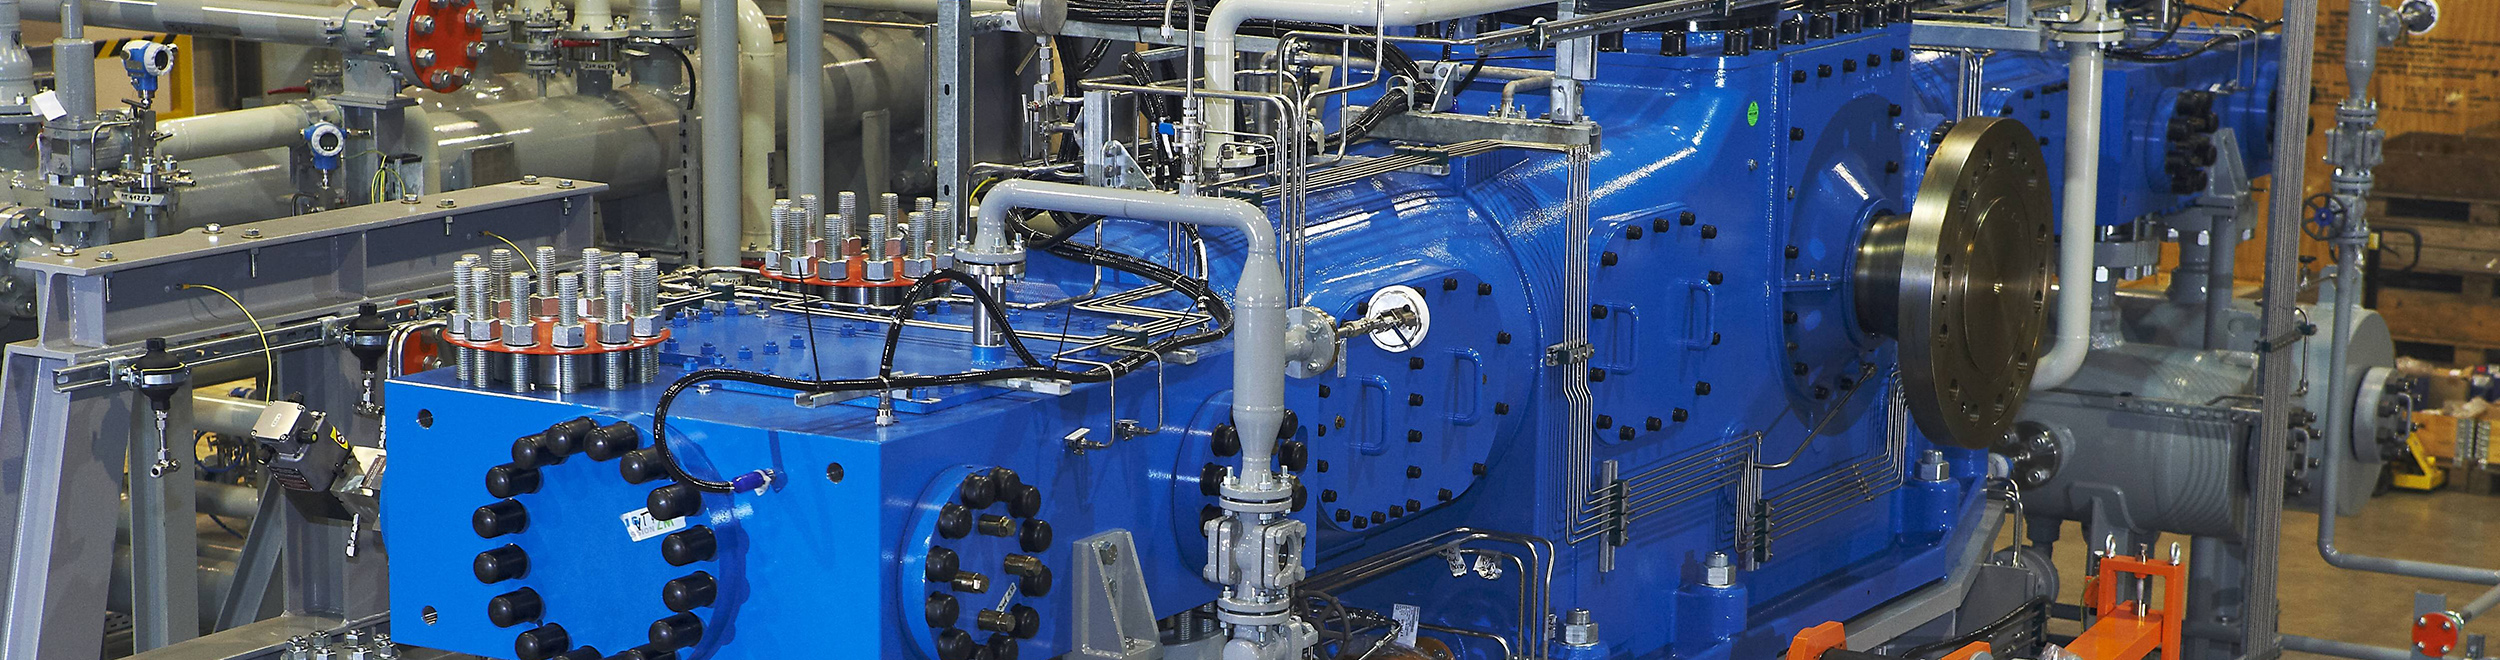 Shown is a section of a blue reciprocating compressor in boxer design.